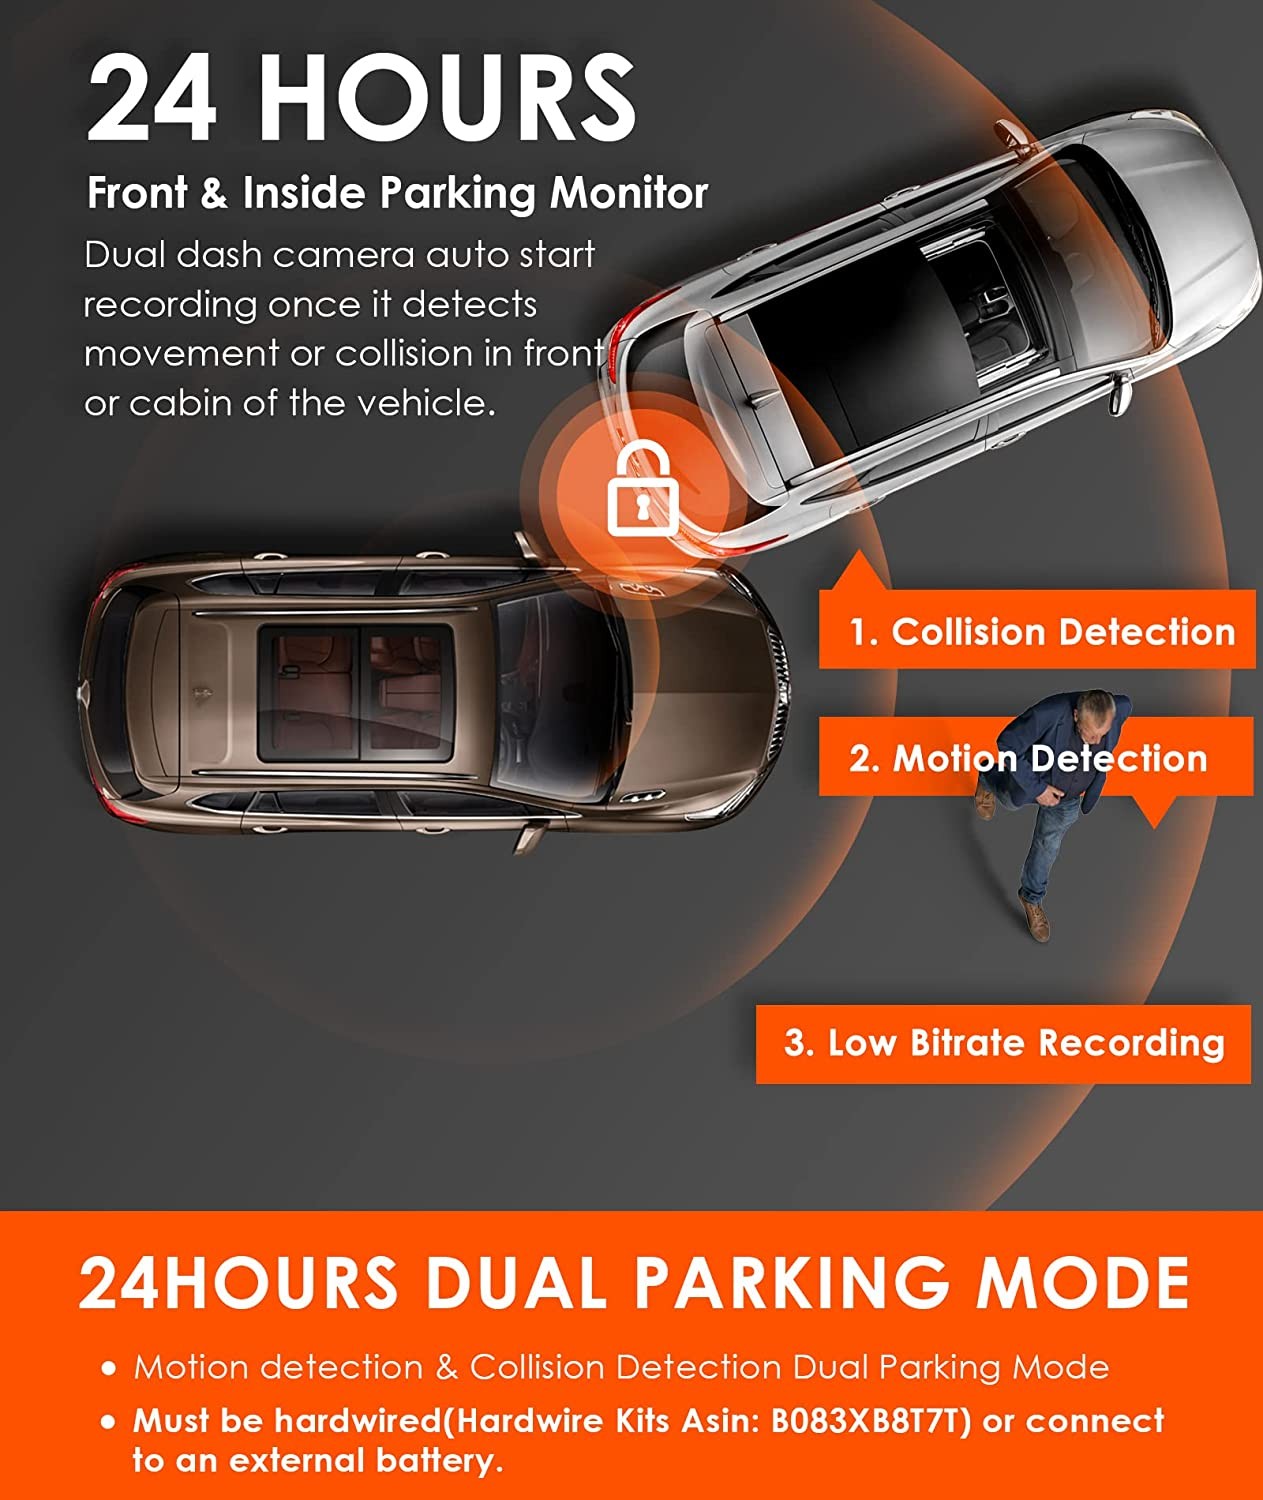 Hardwire Kit Box for Dash Cam 24 Hours Parking Monitor Recorder